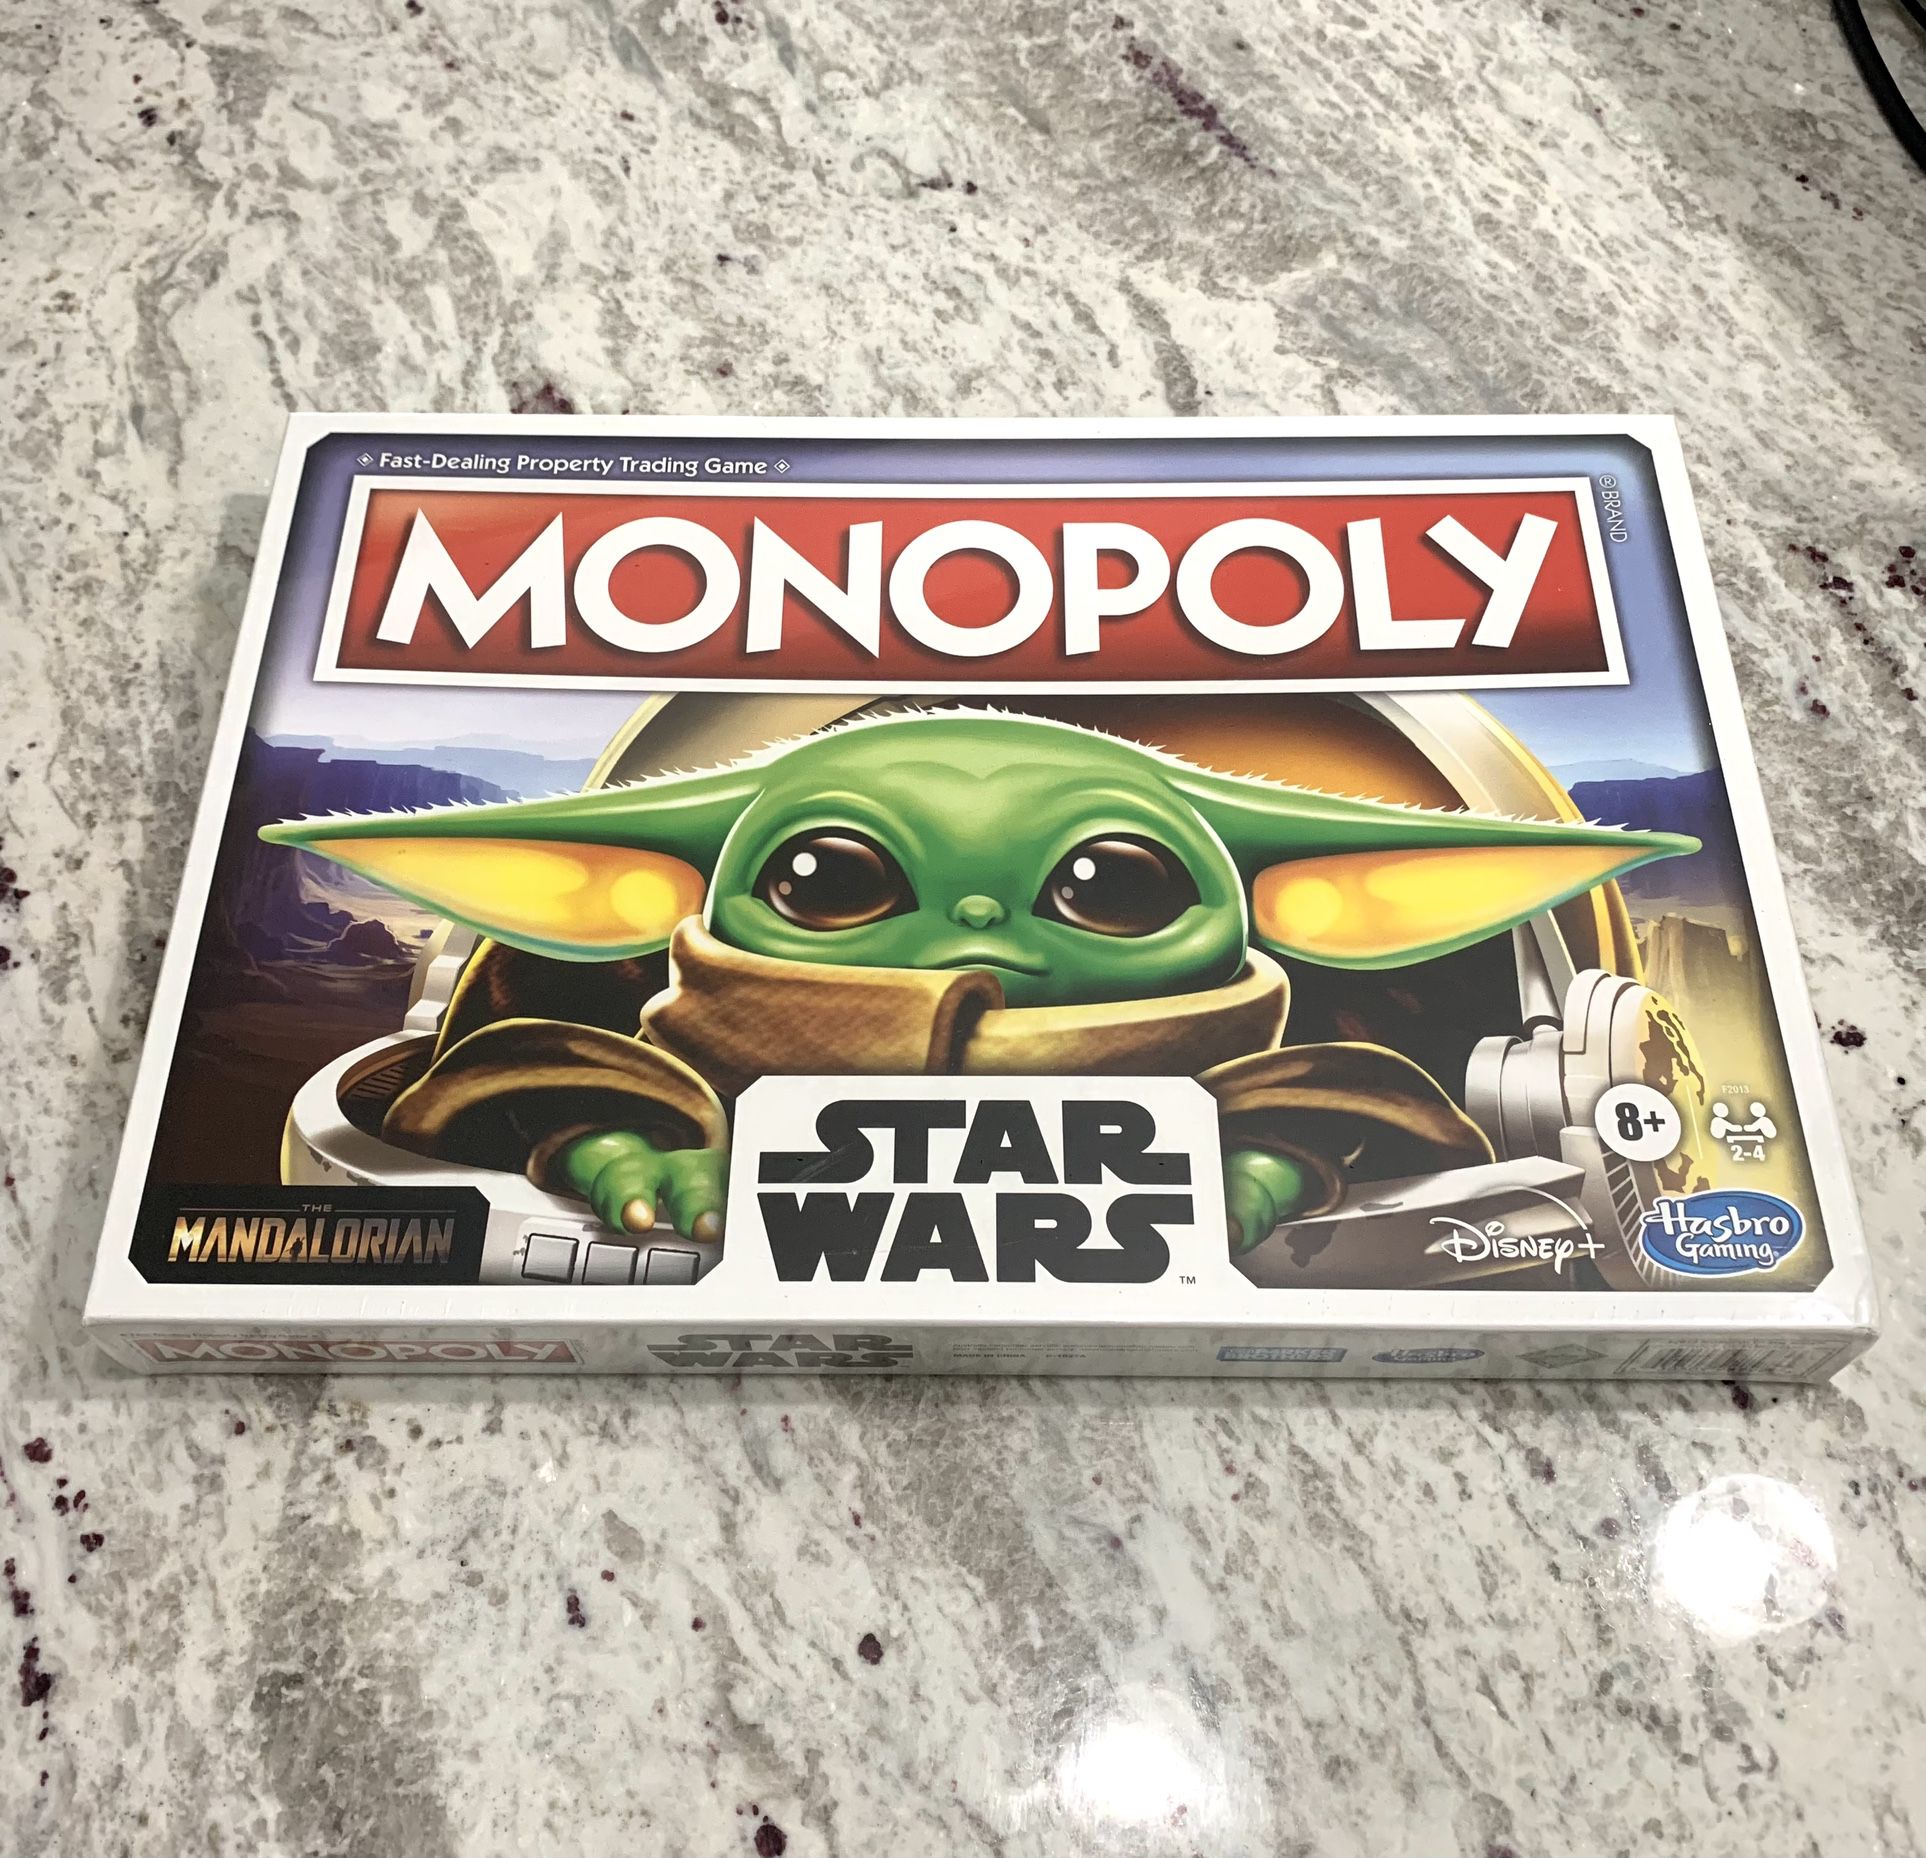 Monopoly Star Wars The Child Edition ** BRAND NEW SEALED ** Baby Yoda Mandalorian Edition